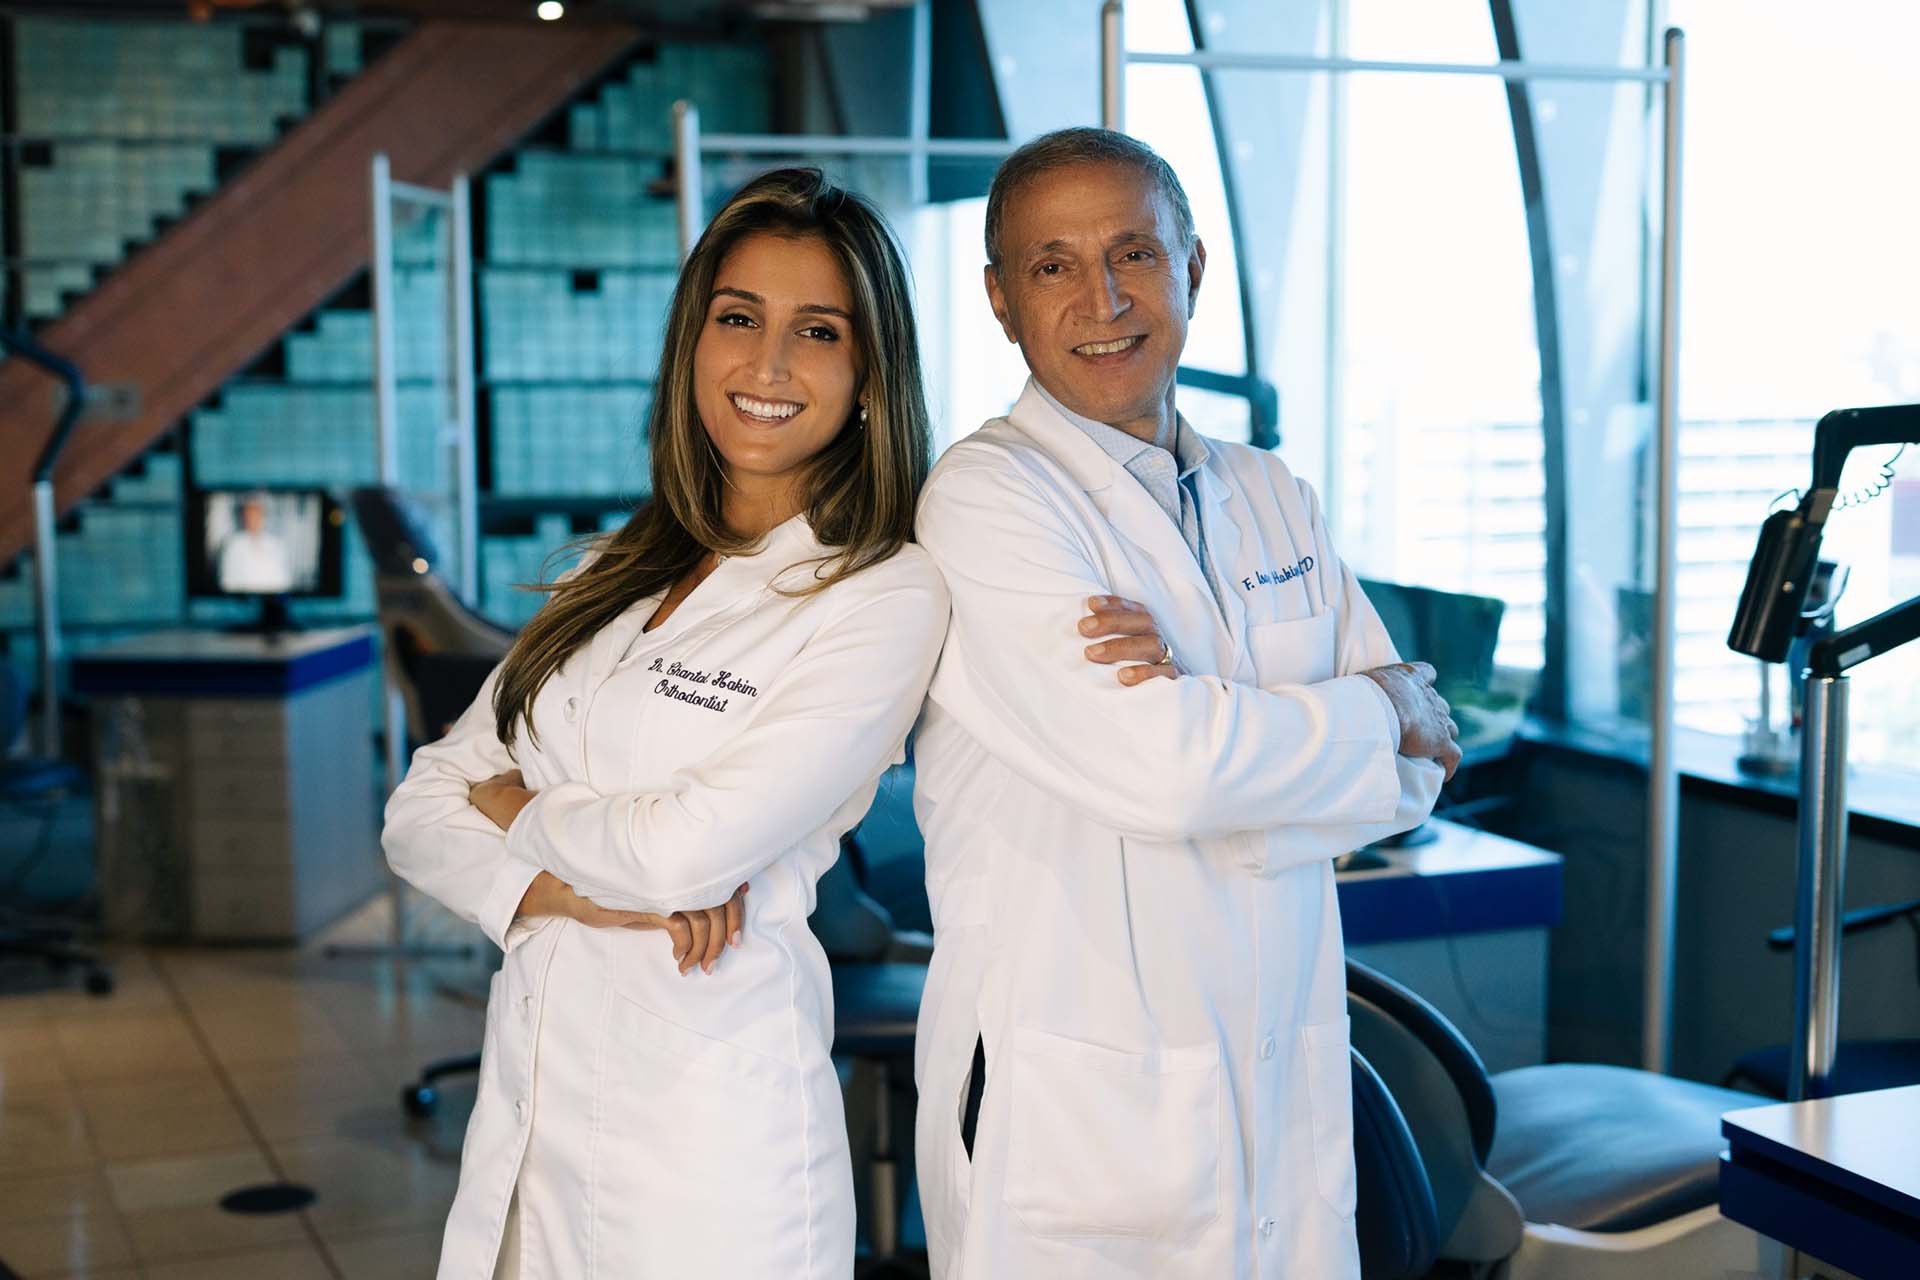 Dr. Chantal Hakim and Dr. F. Isaac Hakim at the Orthospaceship in Los Angeles, a Southern California orthodontic practice serving Koreatown, Los Angeles.